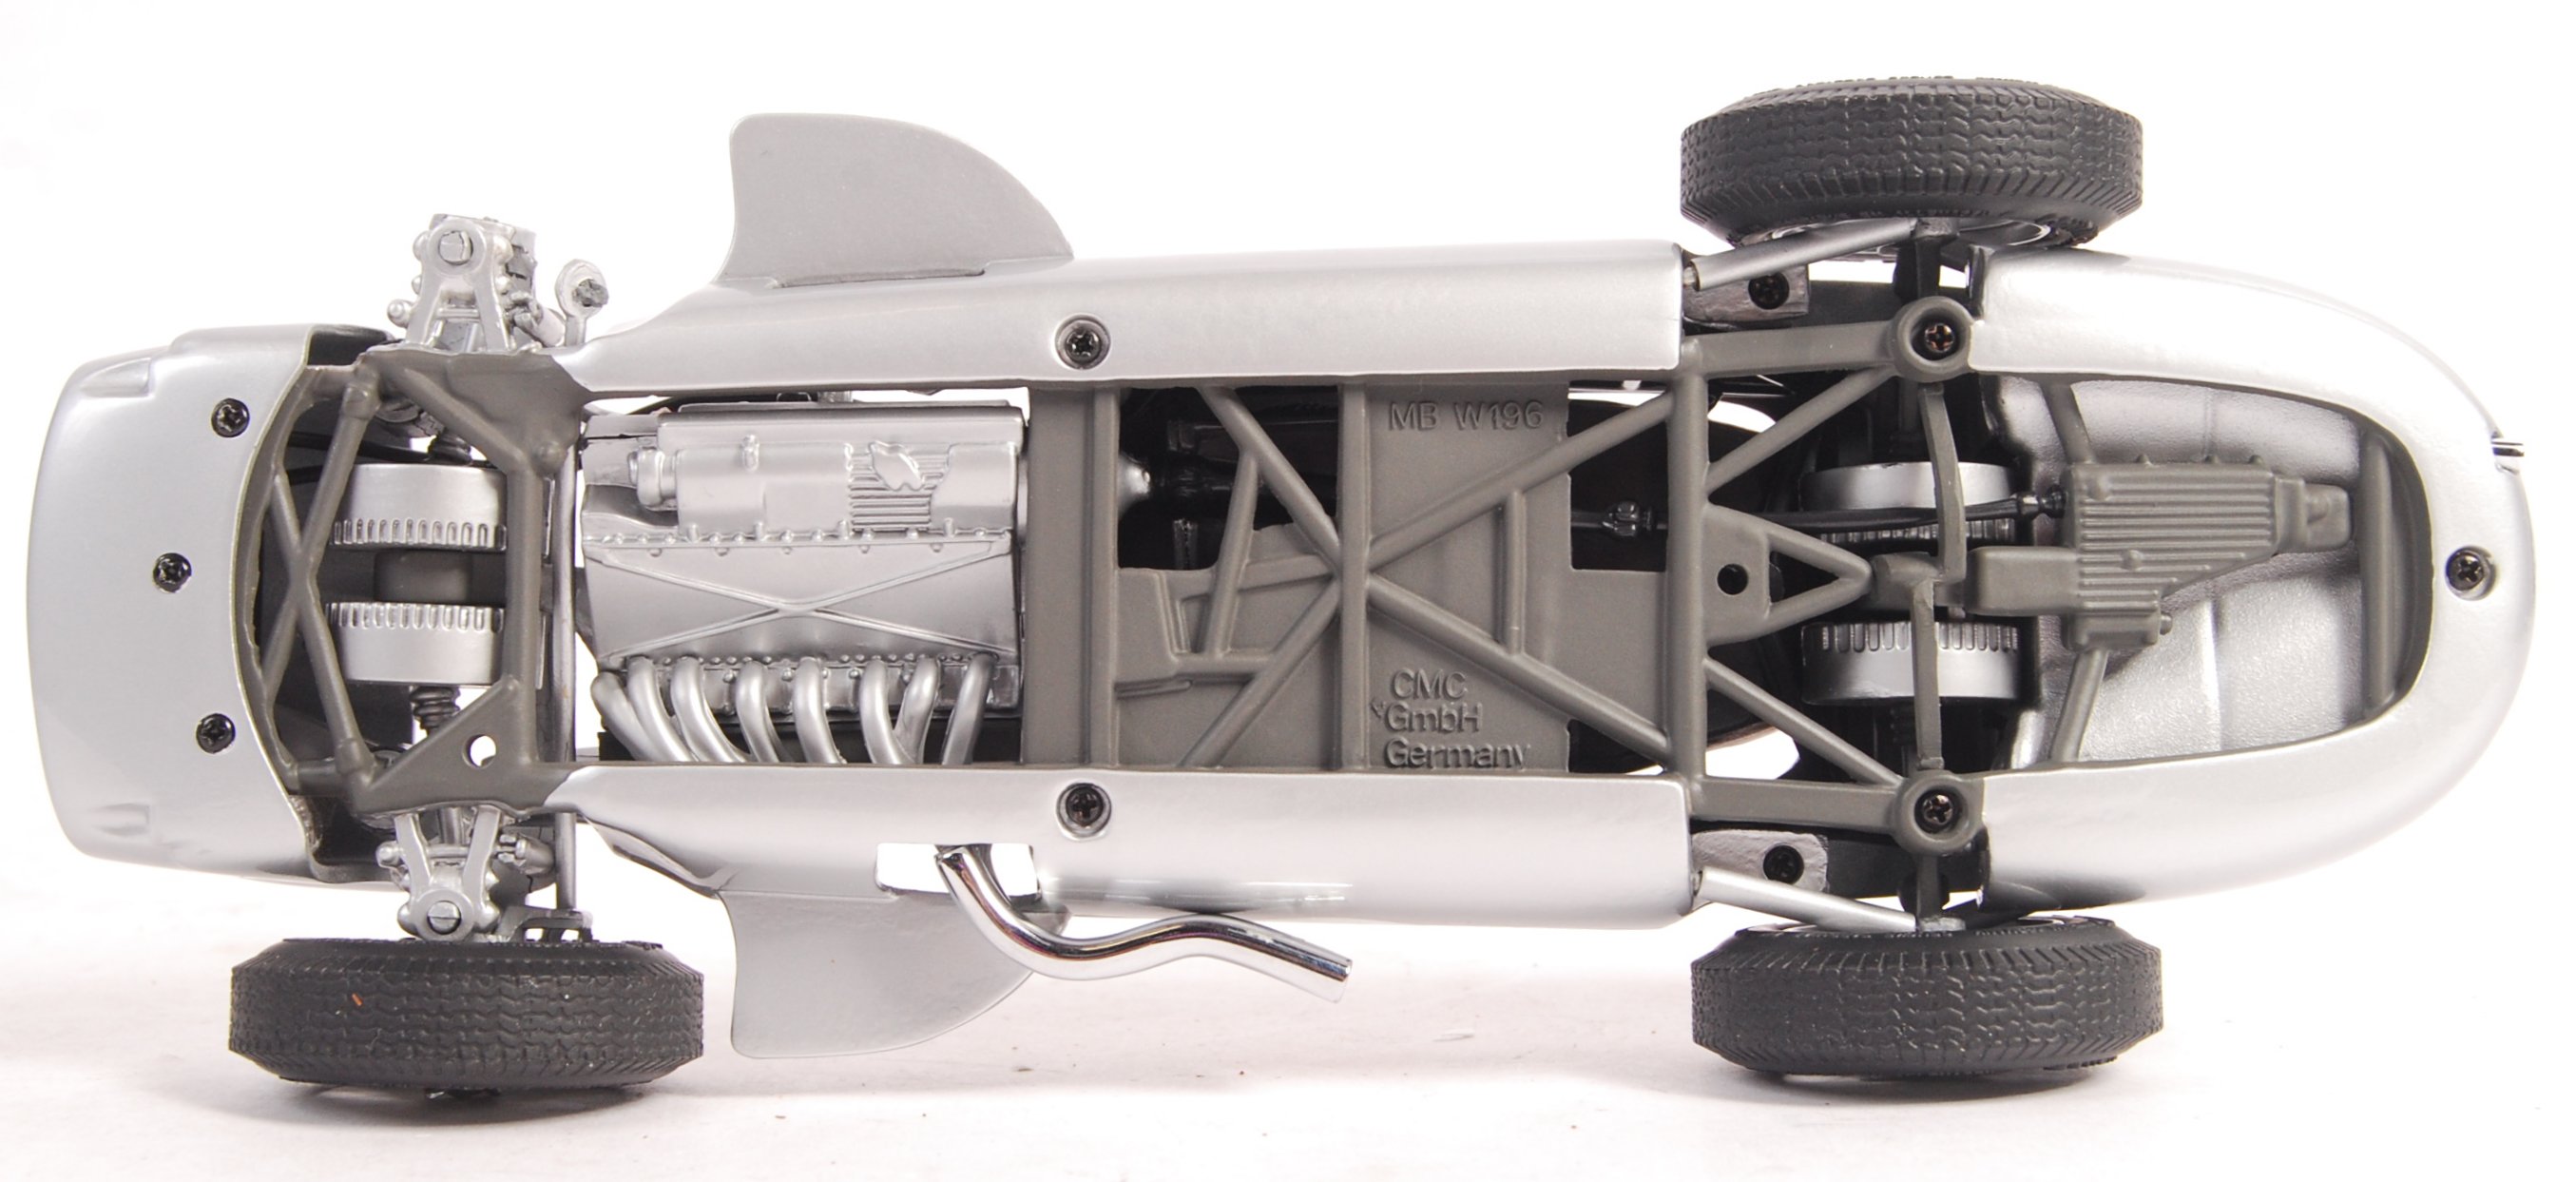 CMC 1/18 SCALE MERCEDES BENZ W196 #12 RACING CAR - Image 4 of 6